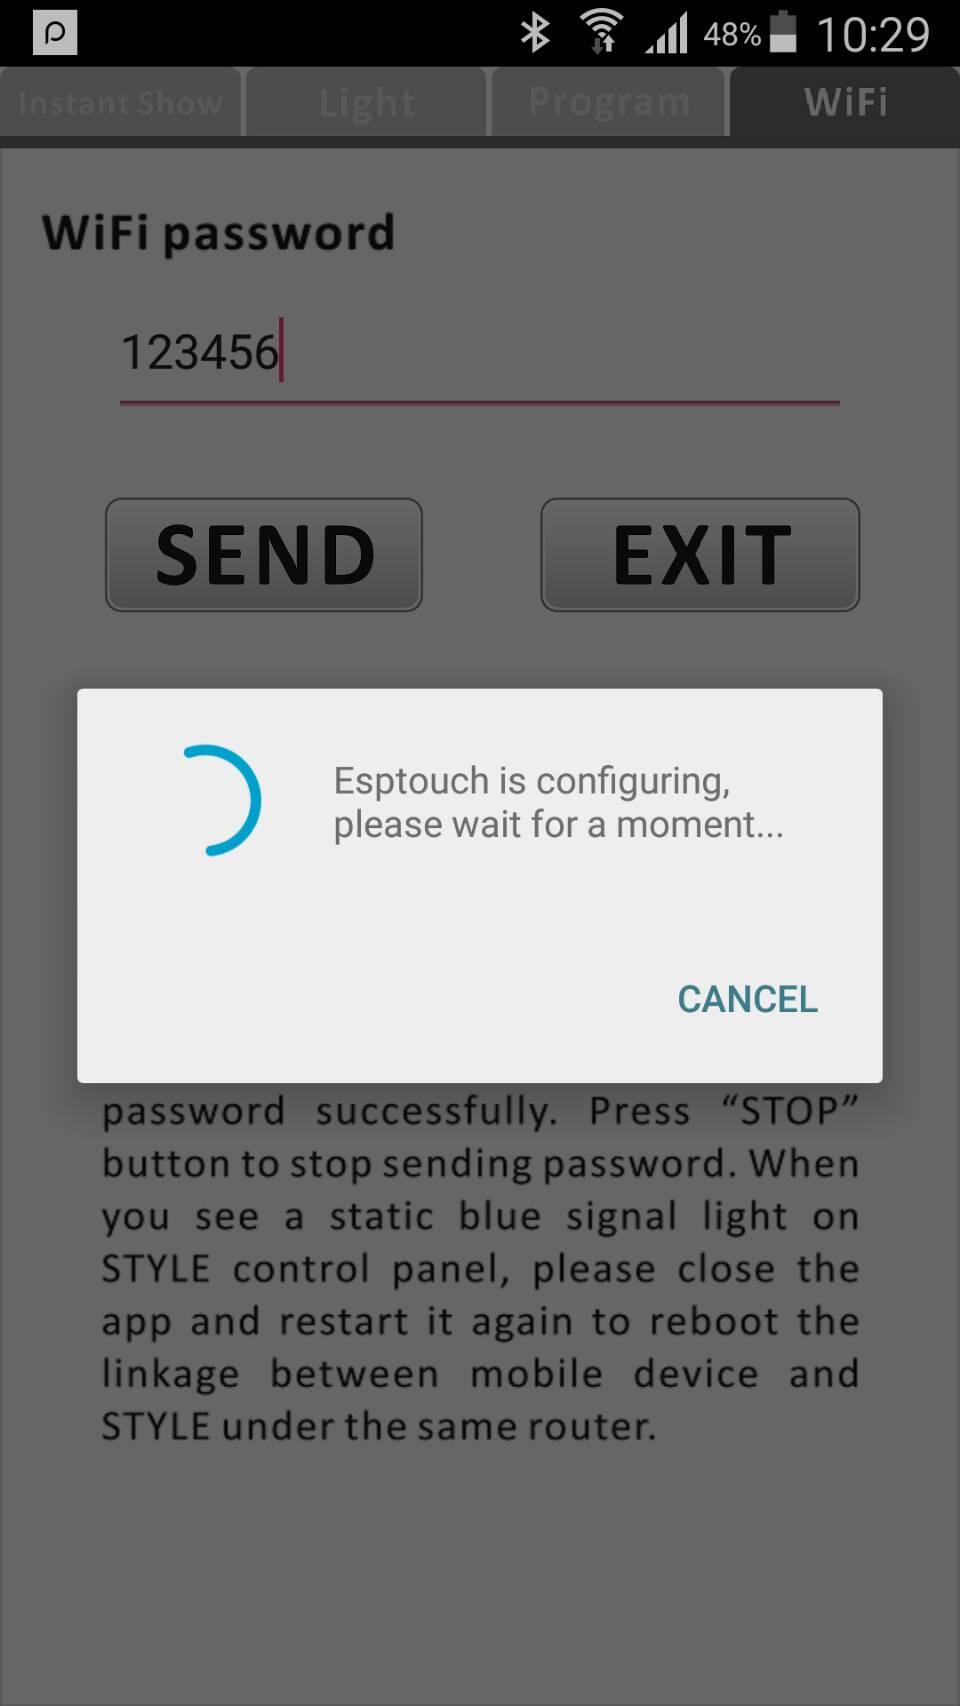 WiFi connec7on (light fixture) As long as the STYLE receives the password (as per the previous page), press the STOP bu\on (for ios version) or CANCEL bu\on (for Android version) on the screen to